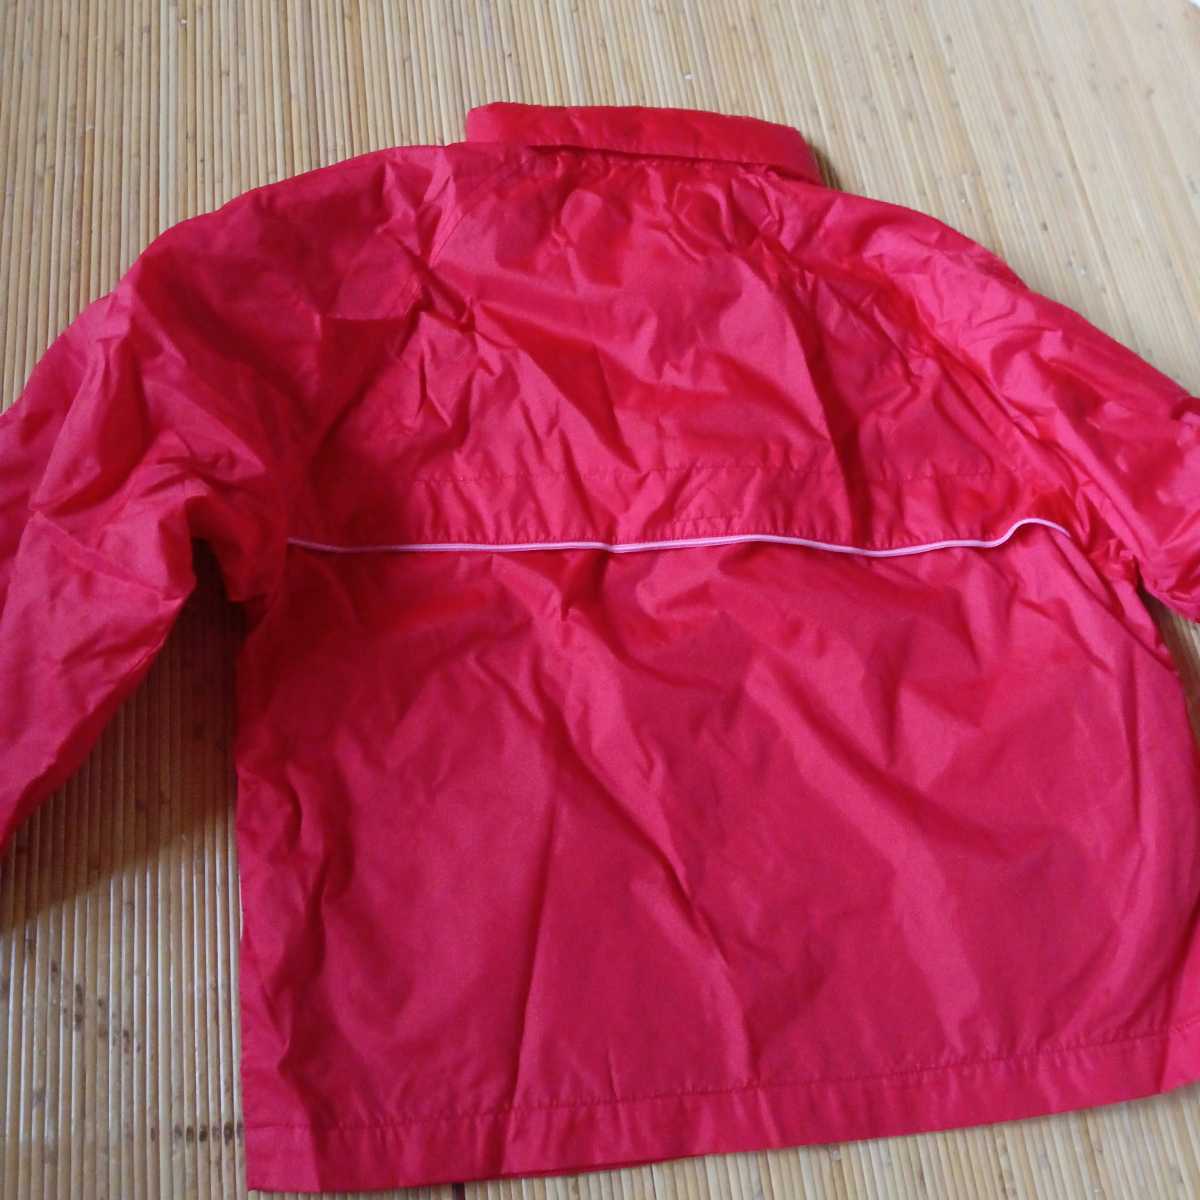 CUBIC MEASURE blouson parka window Bray car 120 size red color girl child clothes Kids Junior with a hood .